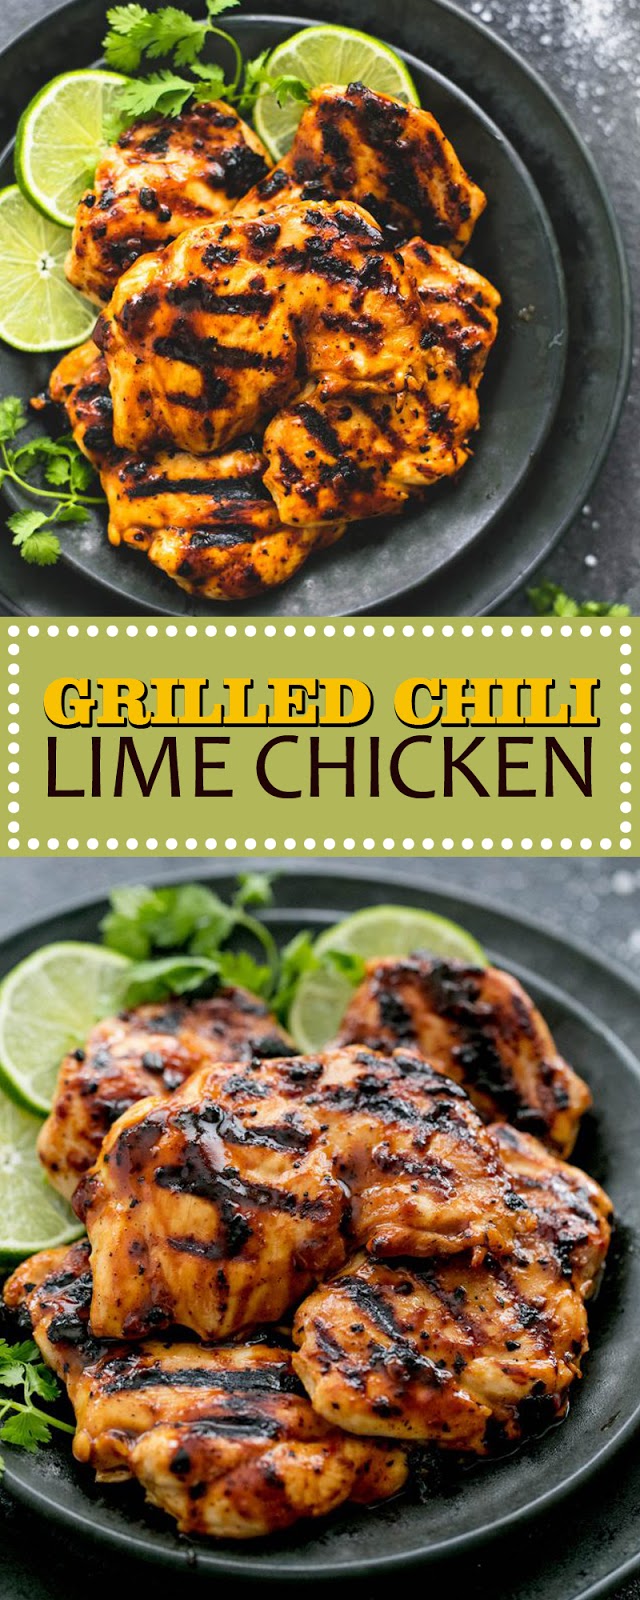 GRILLED CHILI LIME CHICKEN